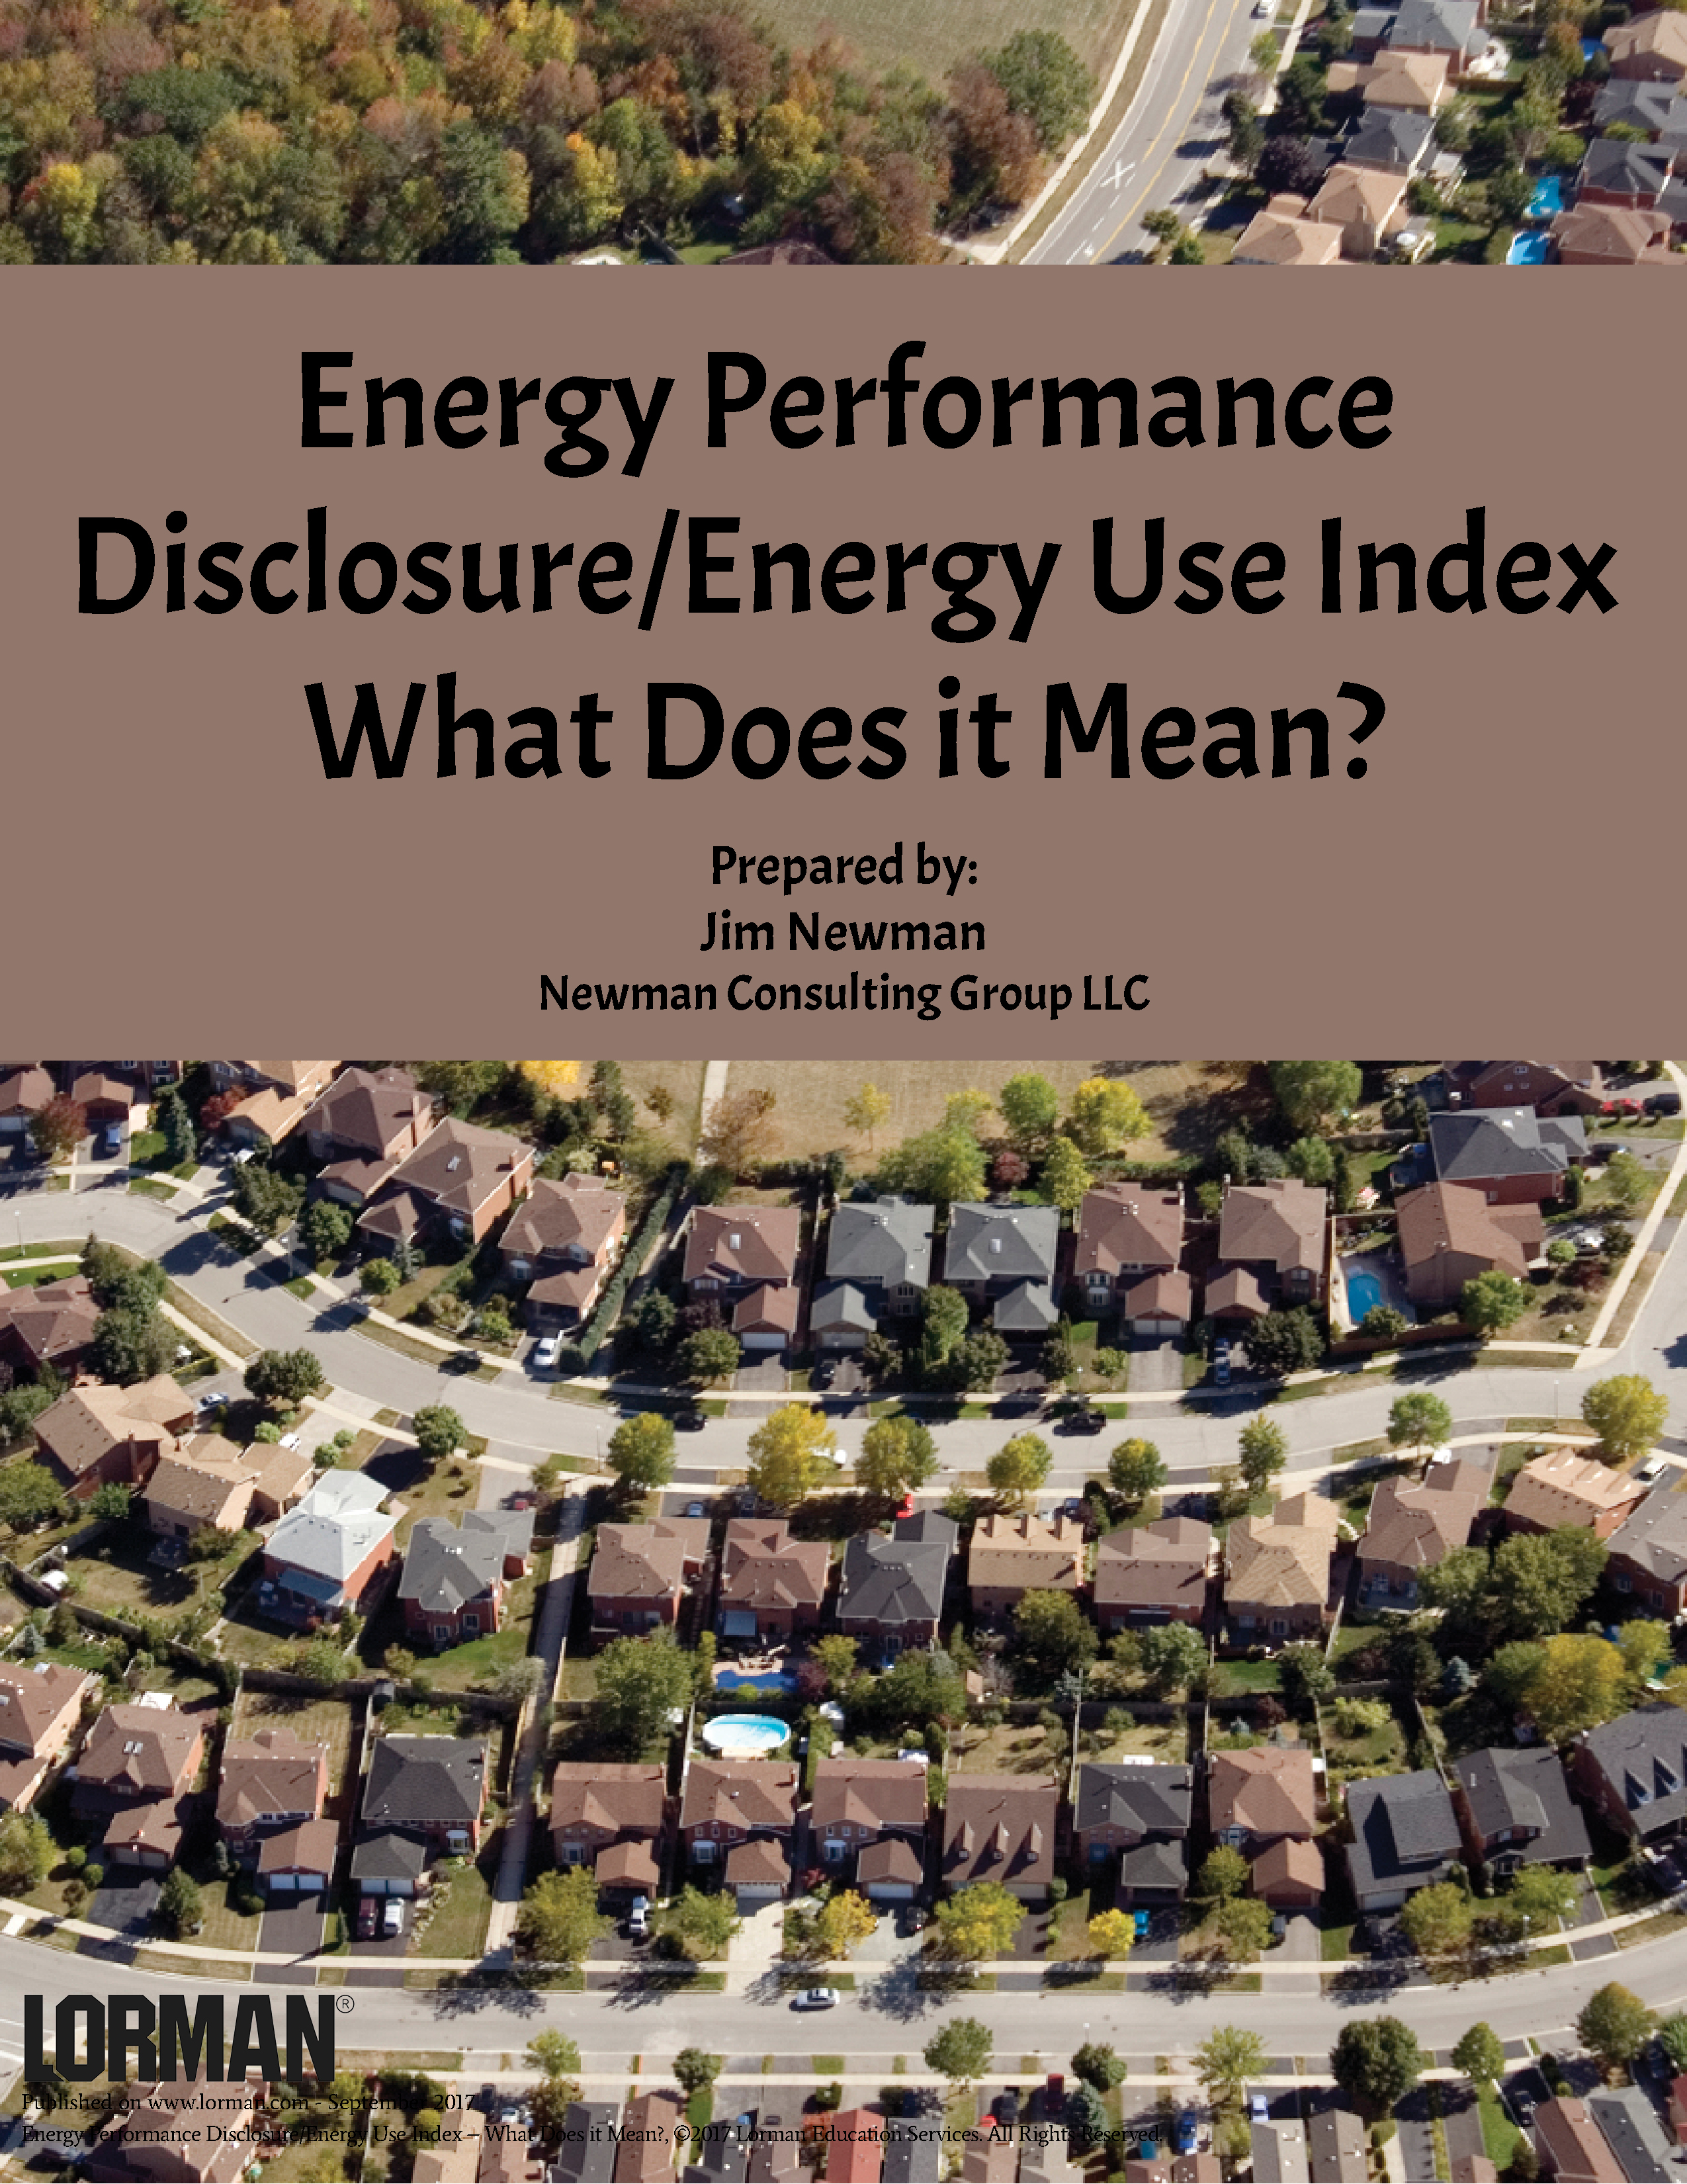 Energy Performance Disclosure/Energy Use Index - What Does it Mean?